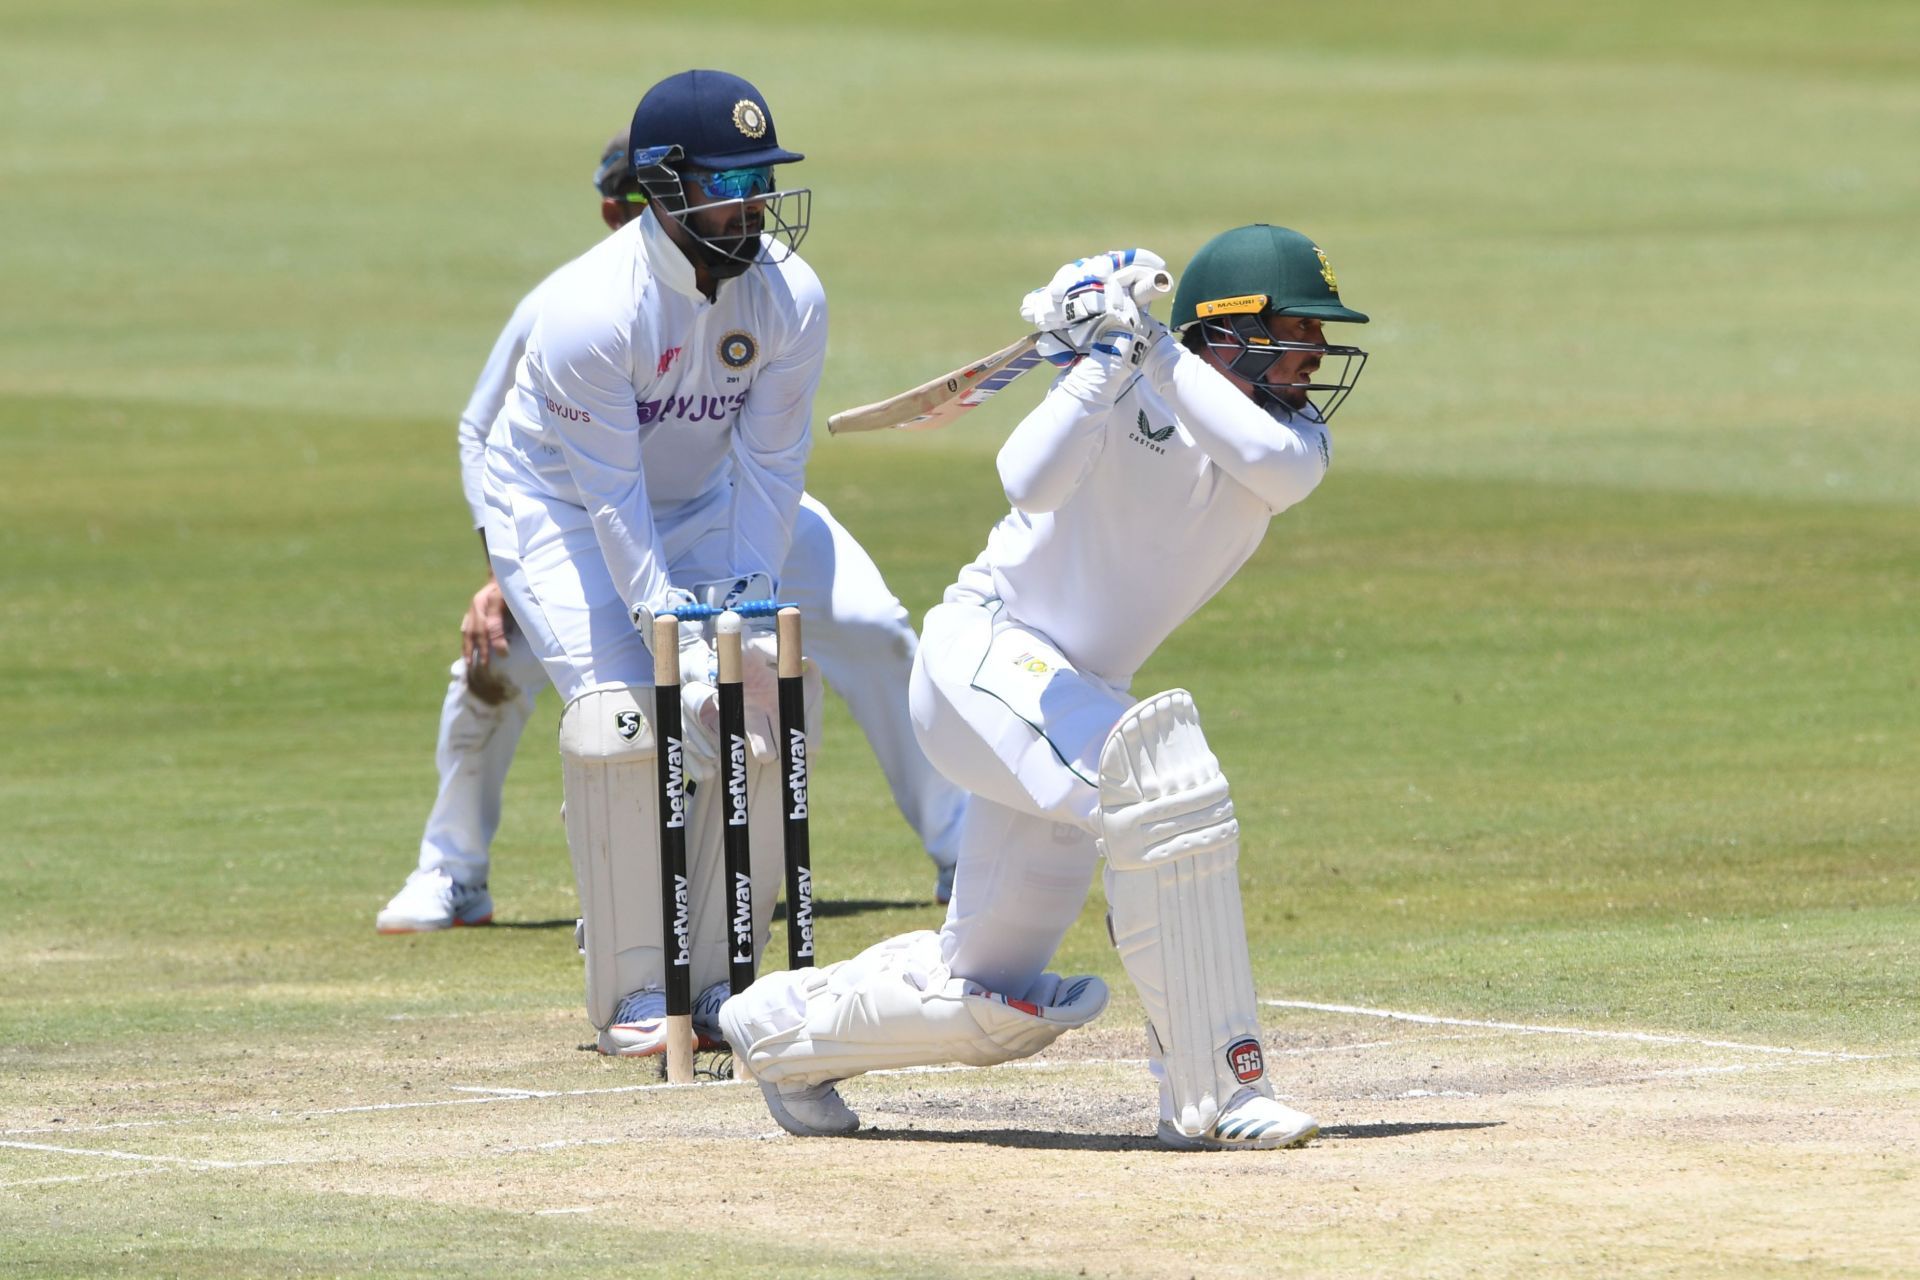 Aakash Chopra highlighted that South Africa will have to find a replacement for Quinton de Kock